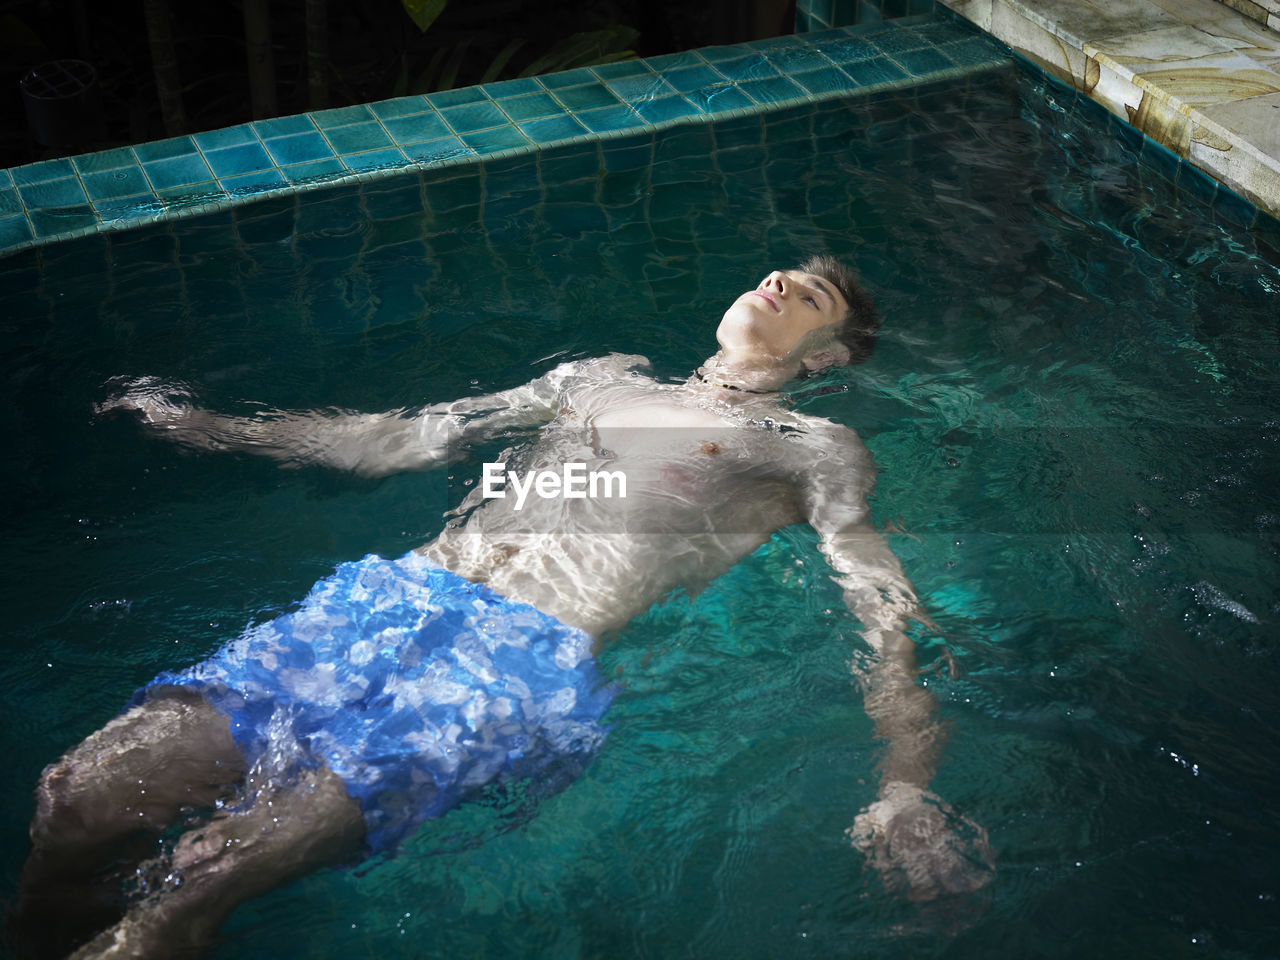 High angle view of shirtless young man swimming in pool